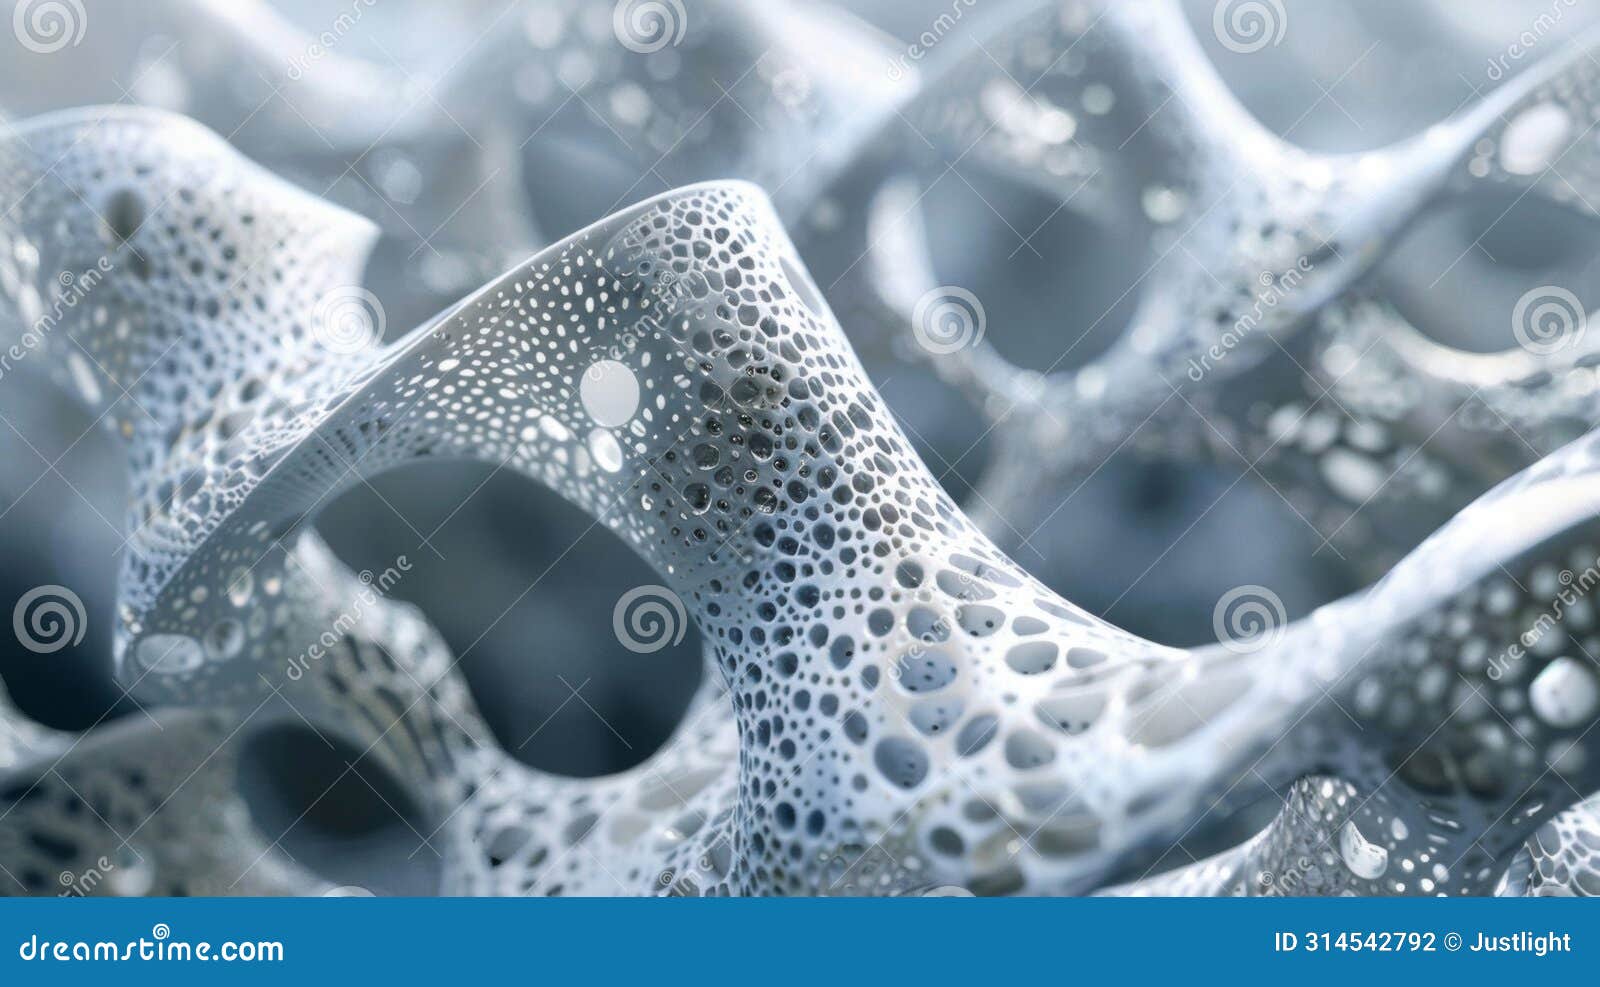 an upclose image of a complex 3d structure seemingly made up of intricate patterns and s. however upon closer